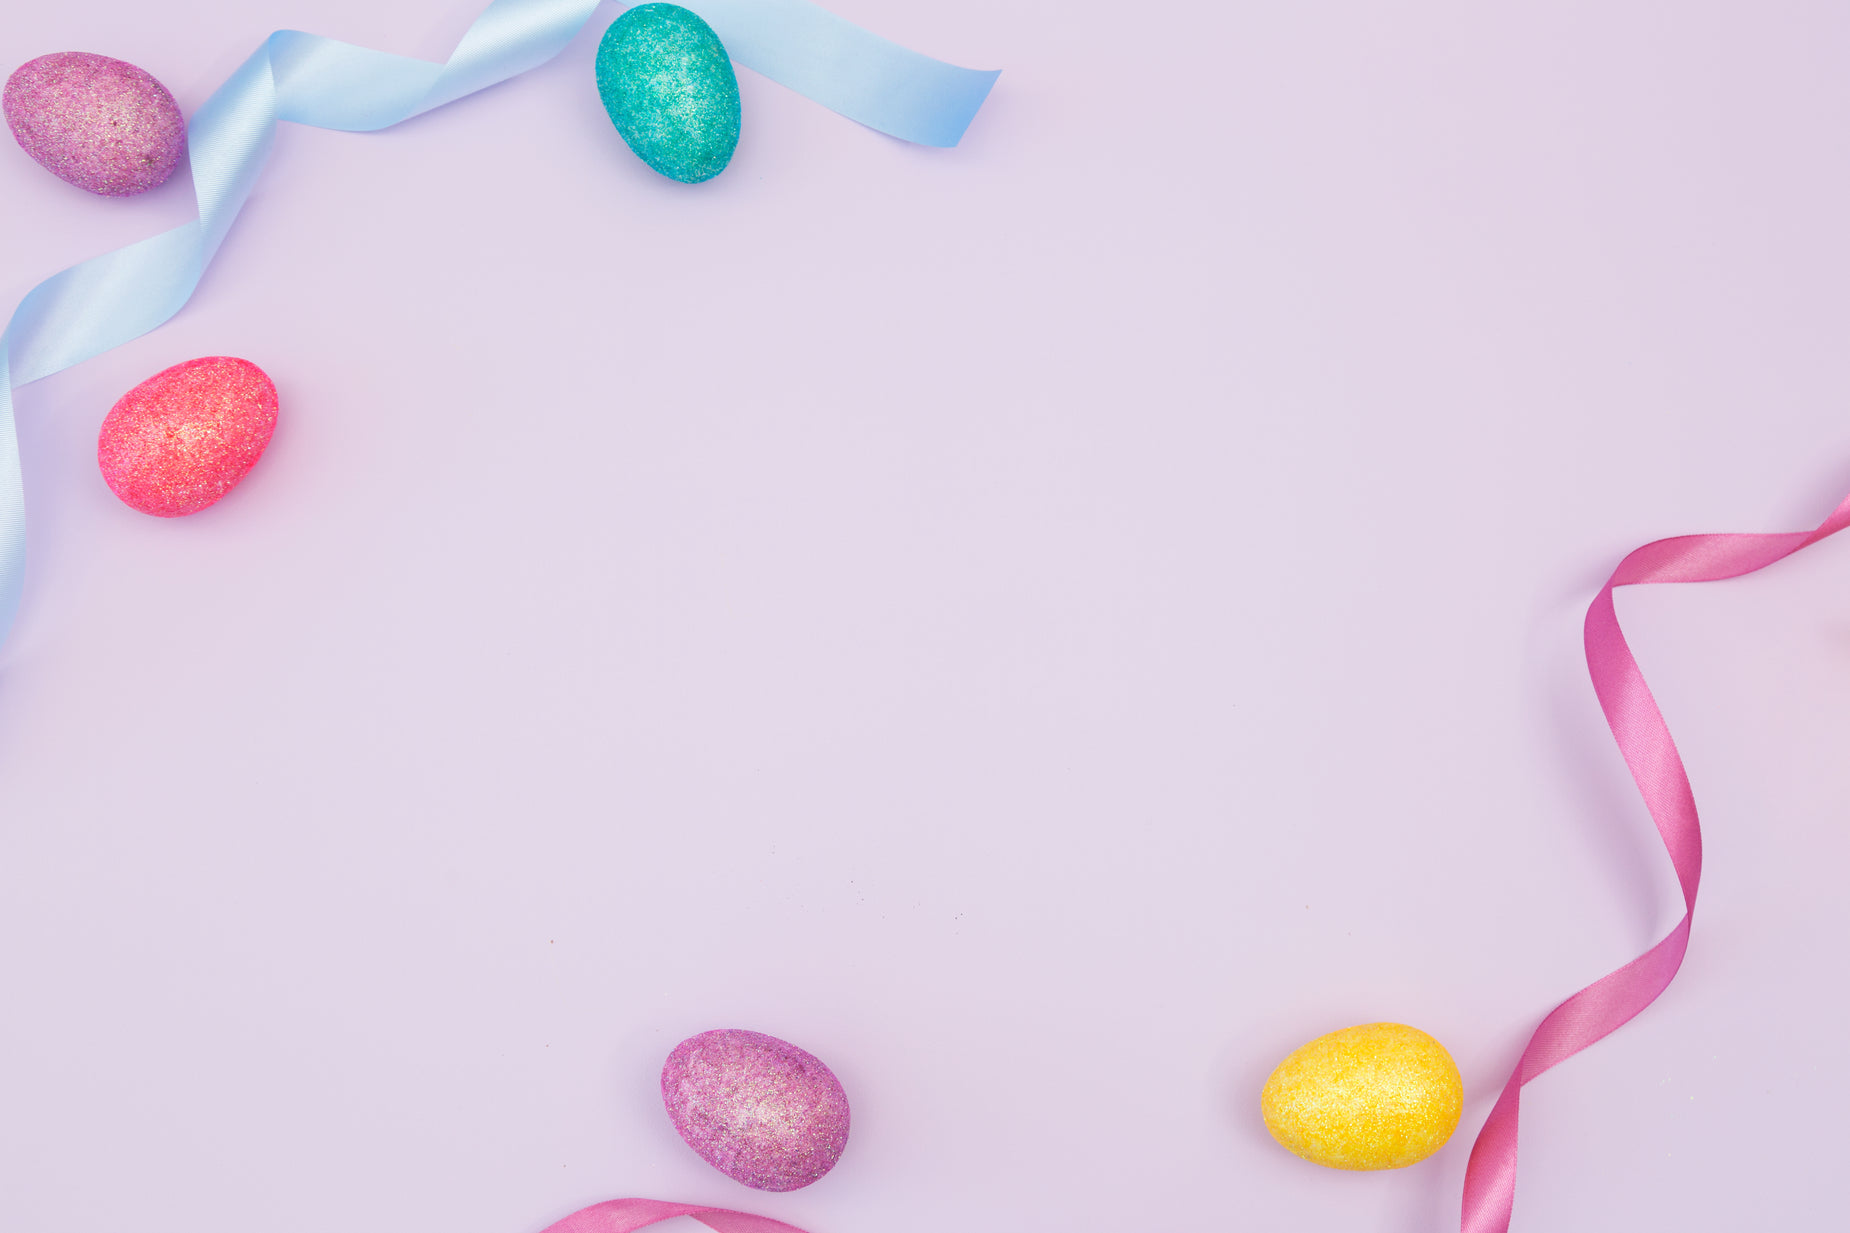 decorative painted eggs and ribbons against pink background